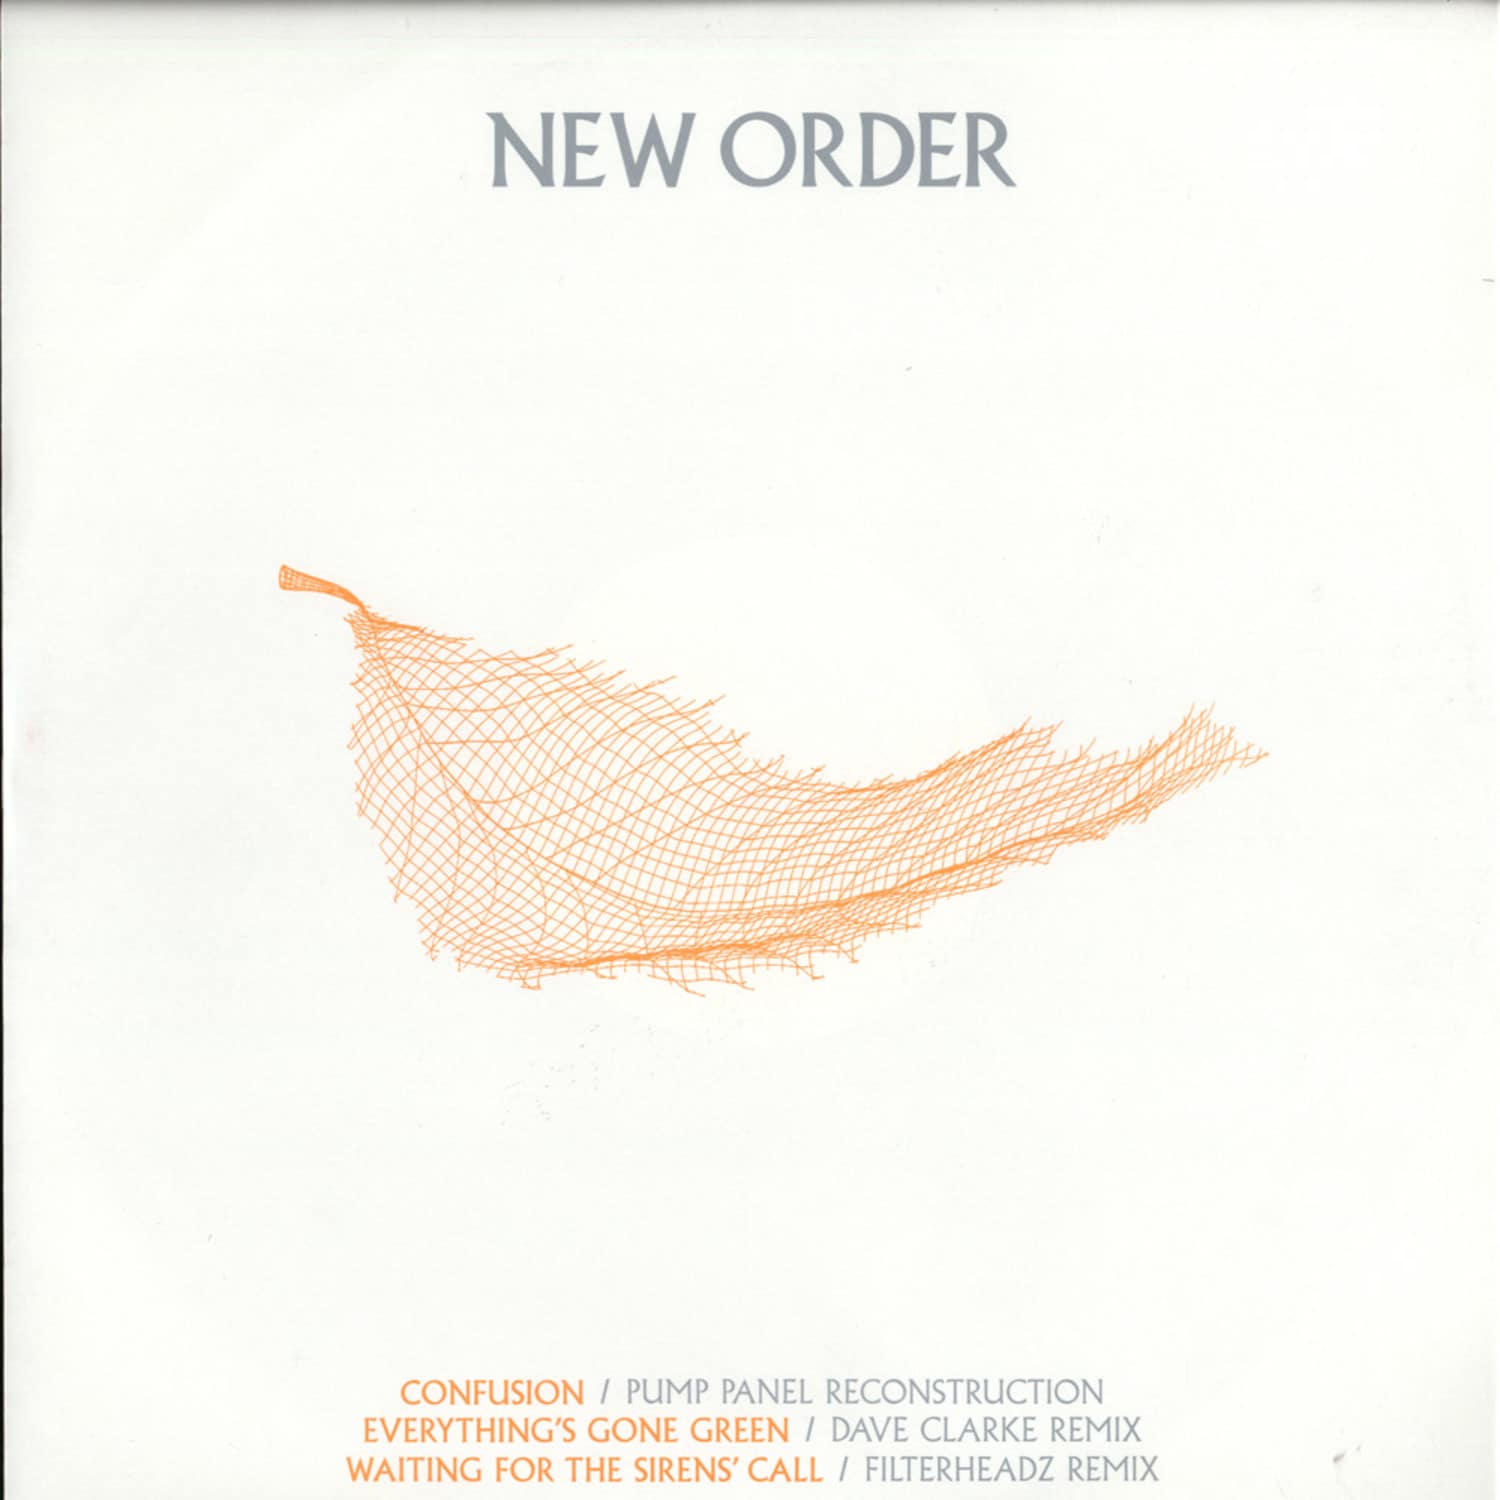 New Order - CONFUSION